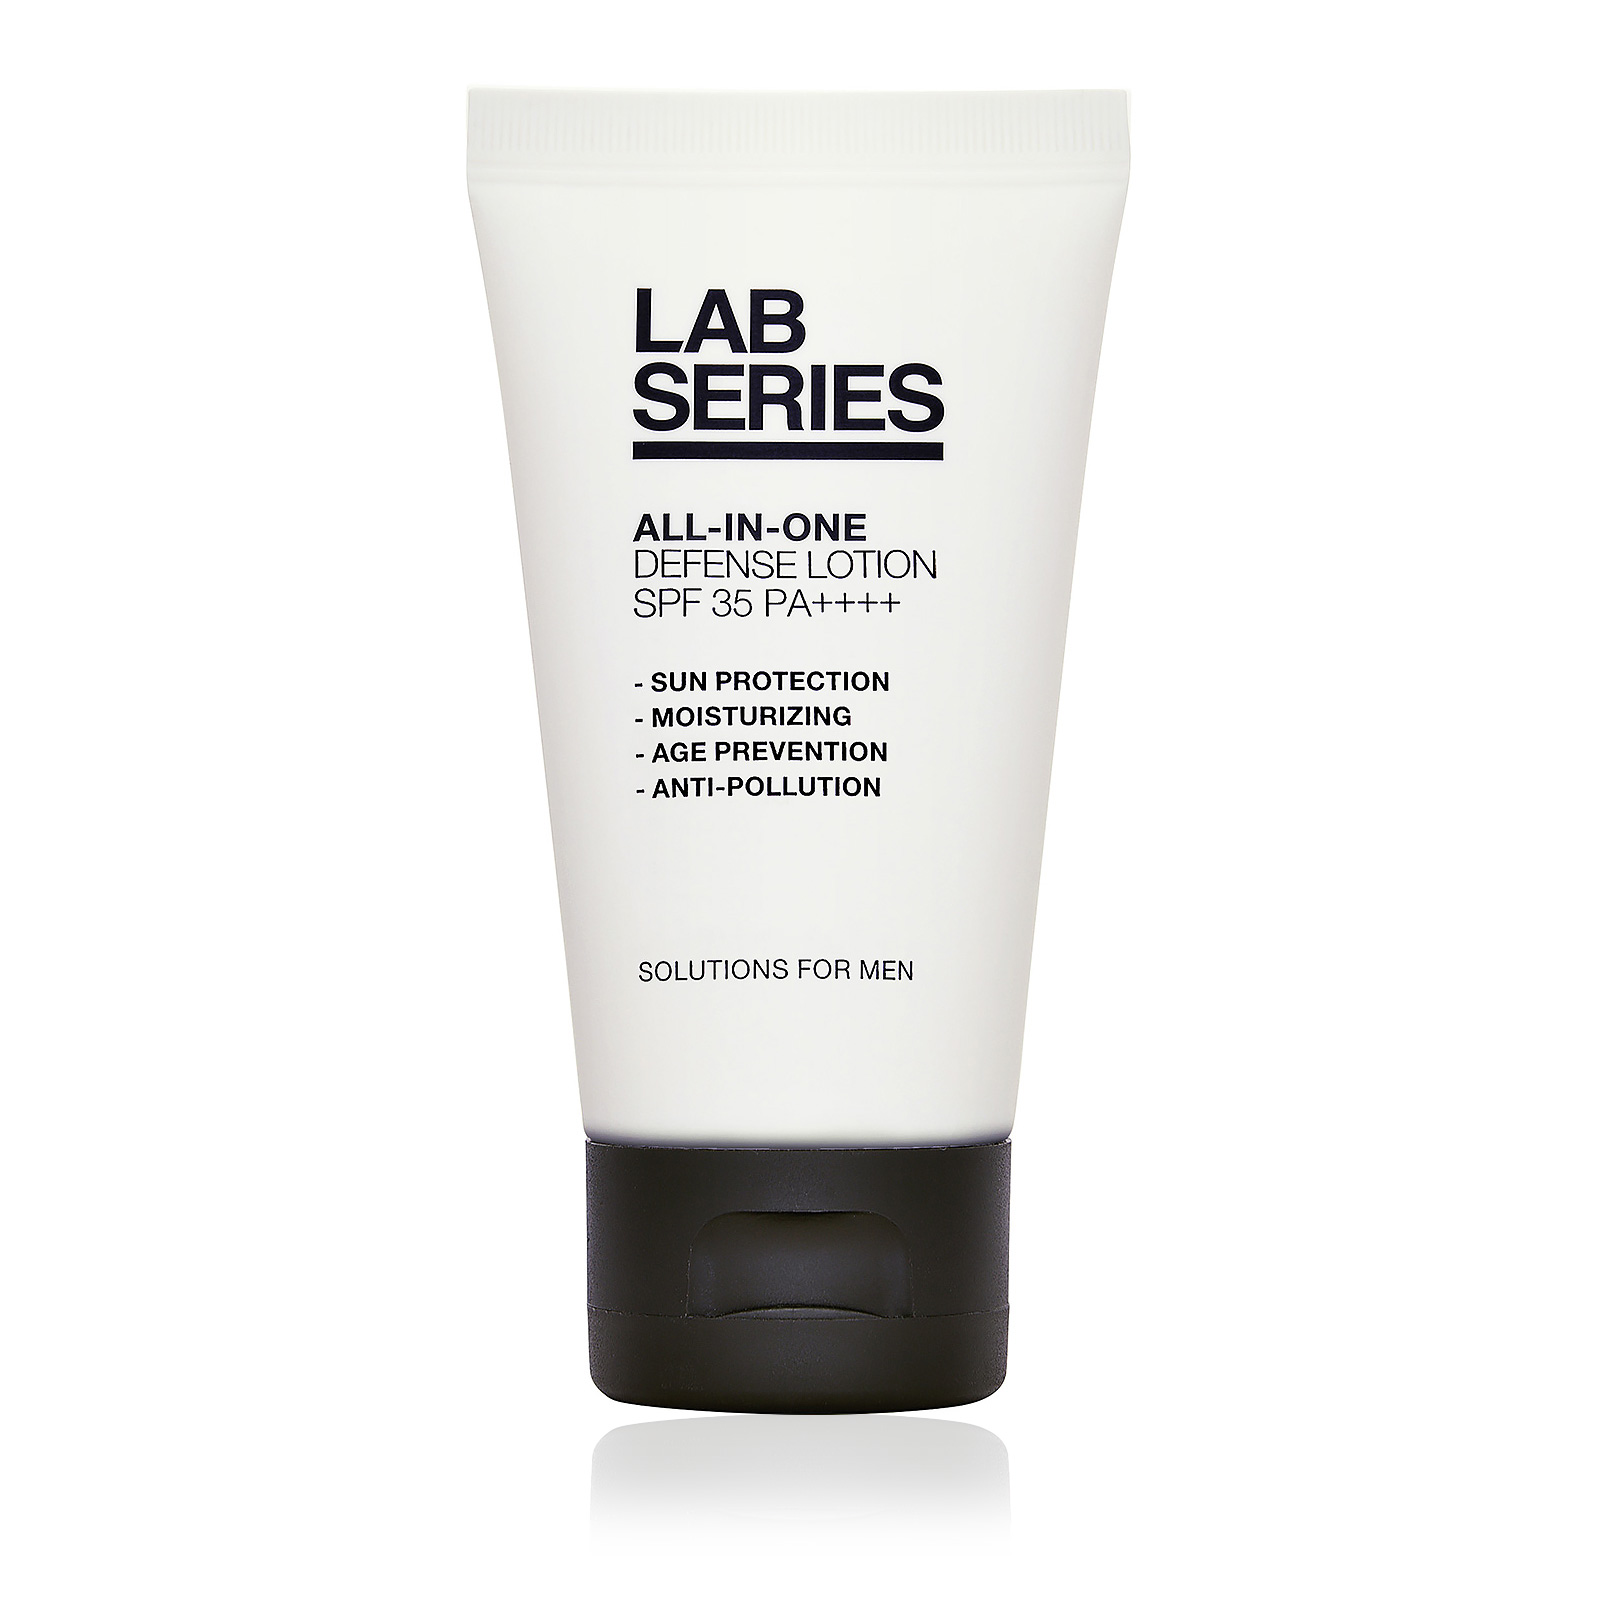 All-In-One Defense Lotion SPF 35 PA++++